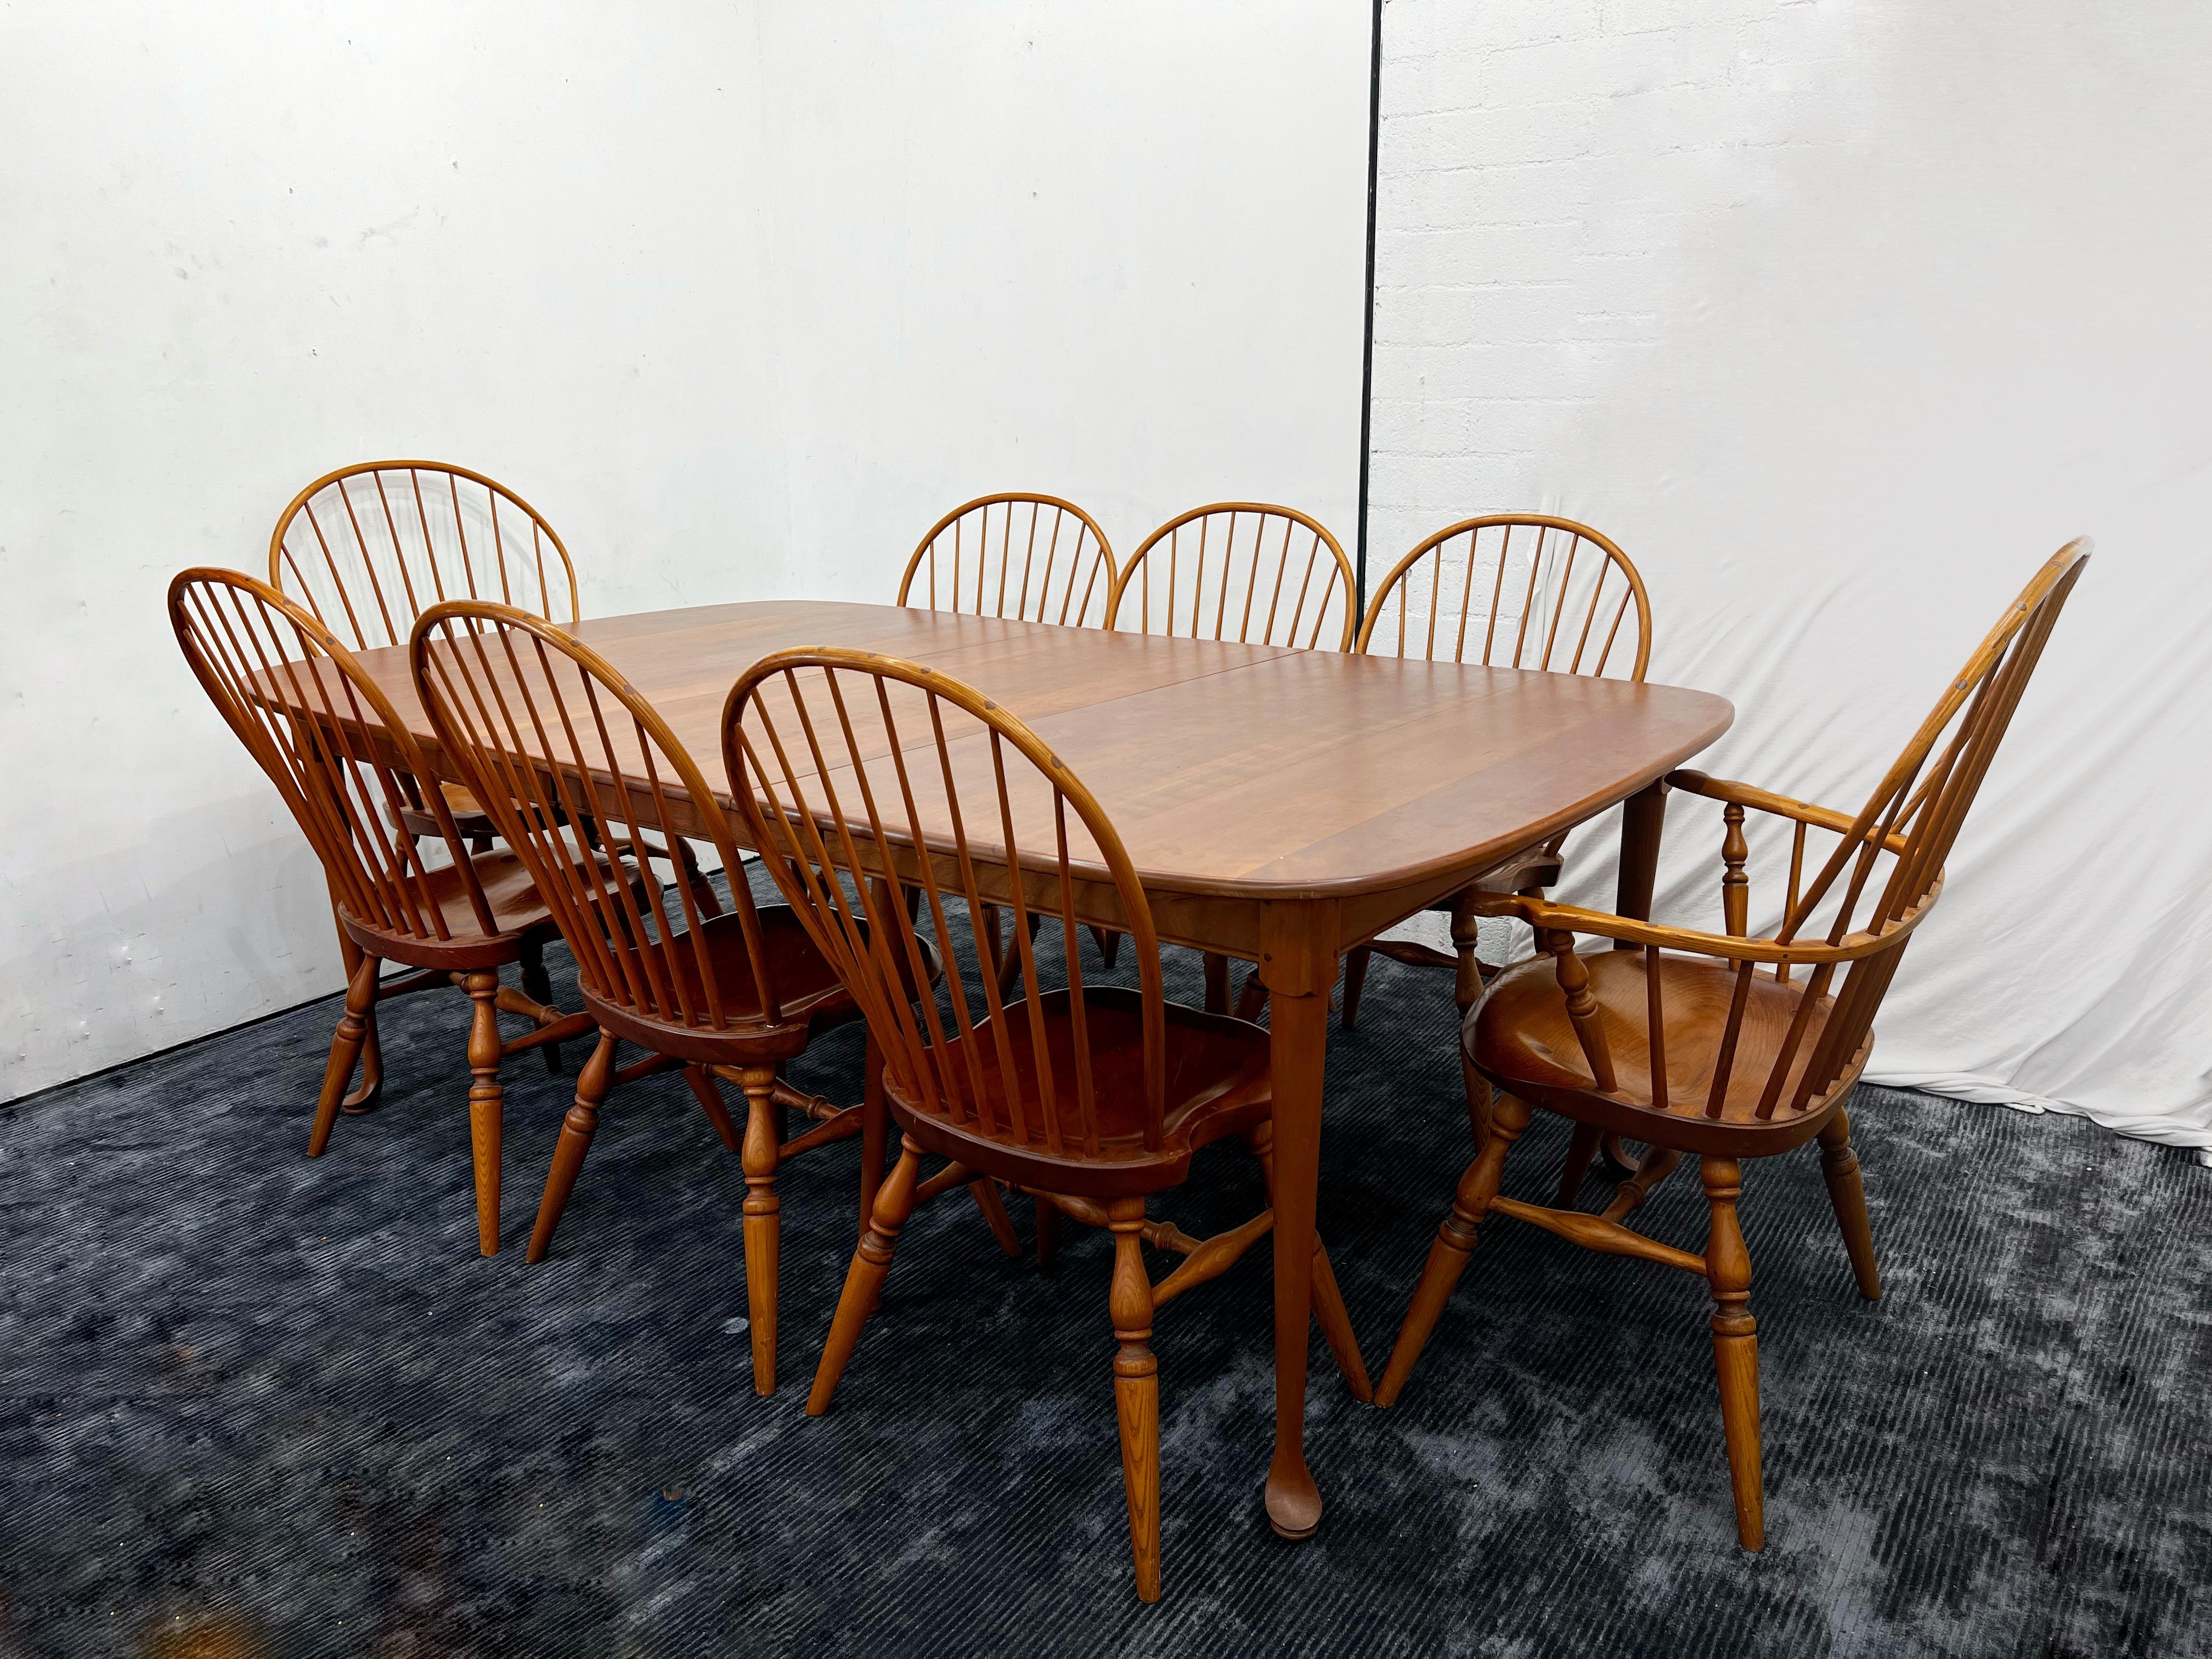 51”D x 62” L x 29” H 
82” L with one leaf in. 
102” L with both leaves in. 

Solid Cherry Extension Dining Table with two leaves by Thomas Moser. Unsigned. 
Middle two legs are removable, and only needed when both both leaves are in. 
 
Top